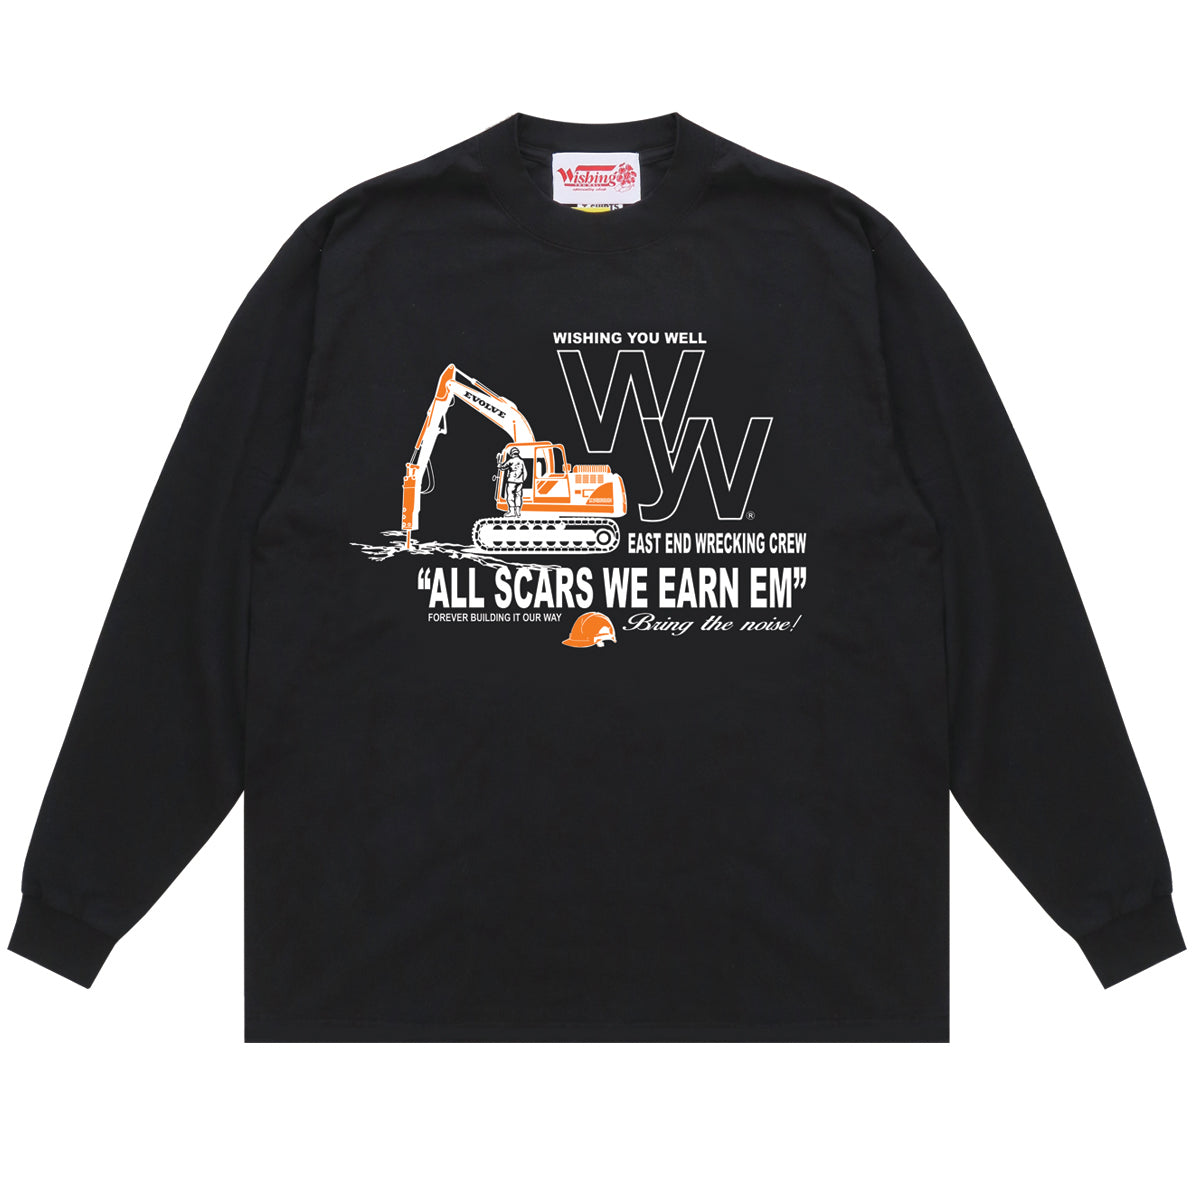 SCARBOROUGH EAST END WRECKING CREW LONG SLEEVE (BLACK)